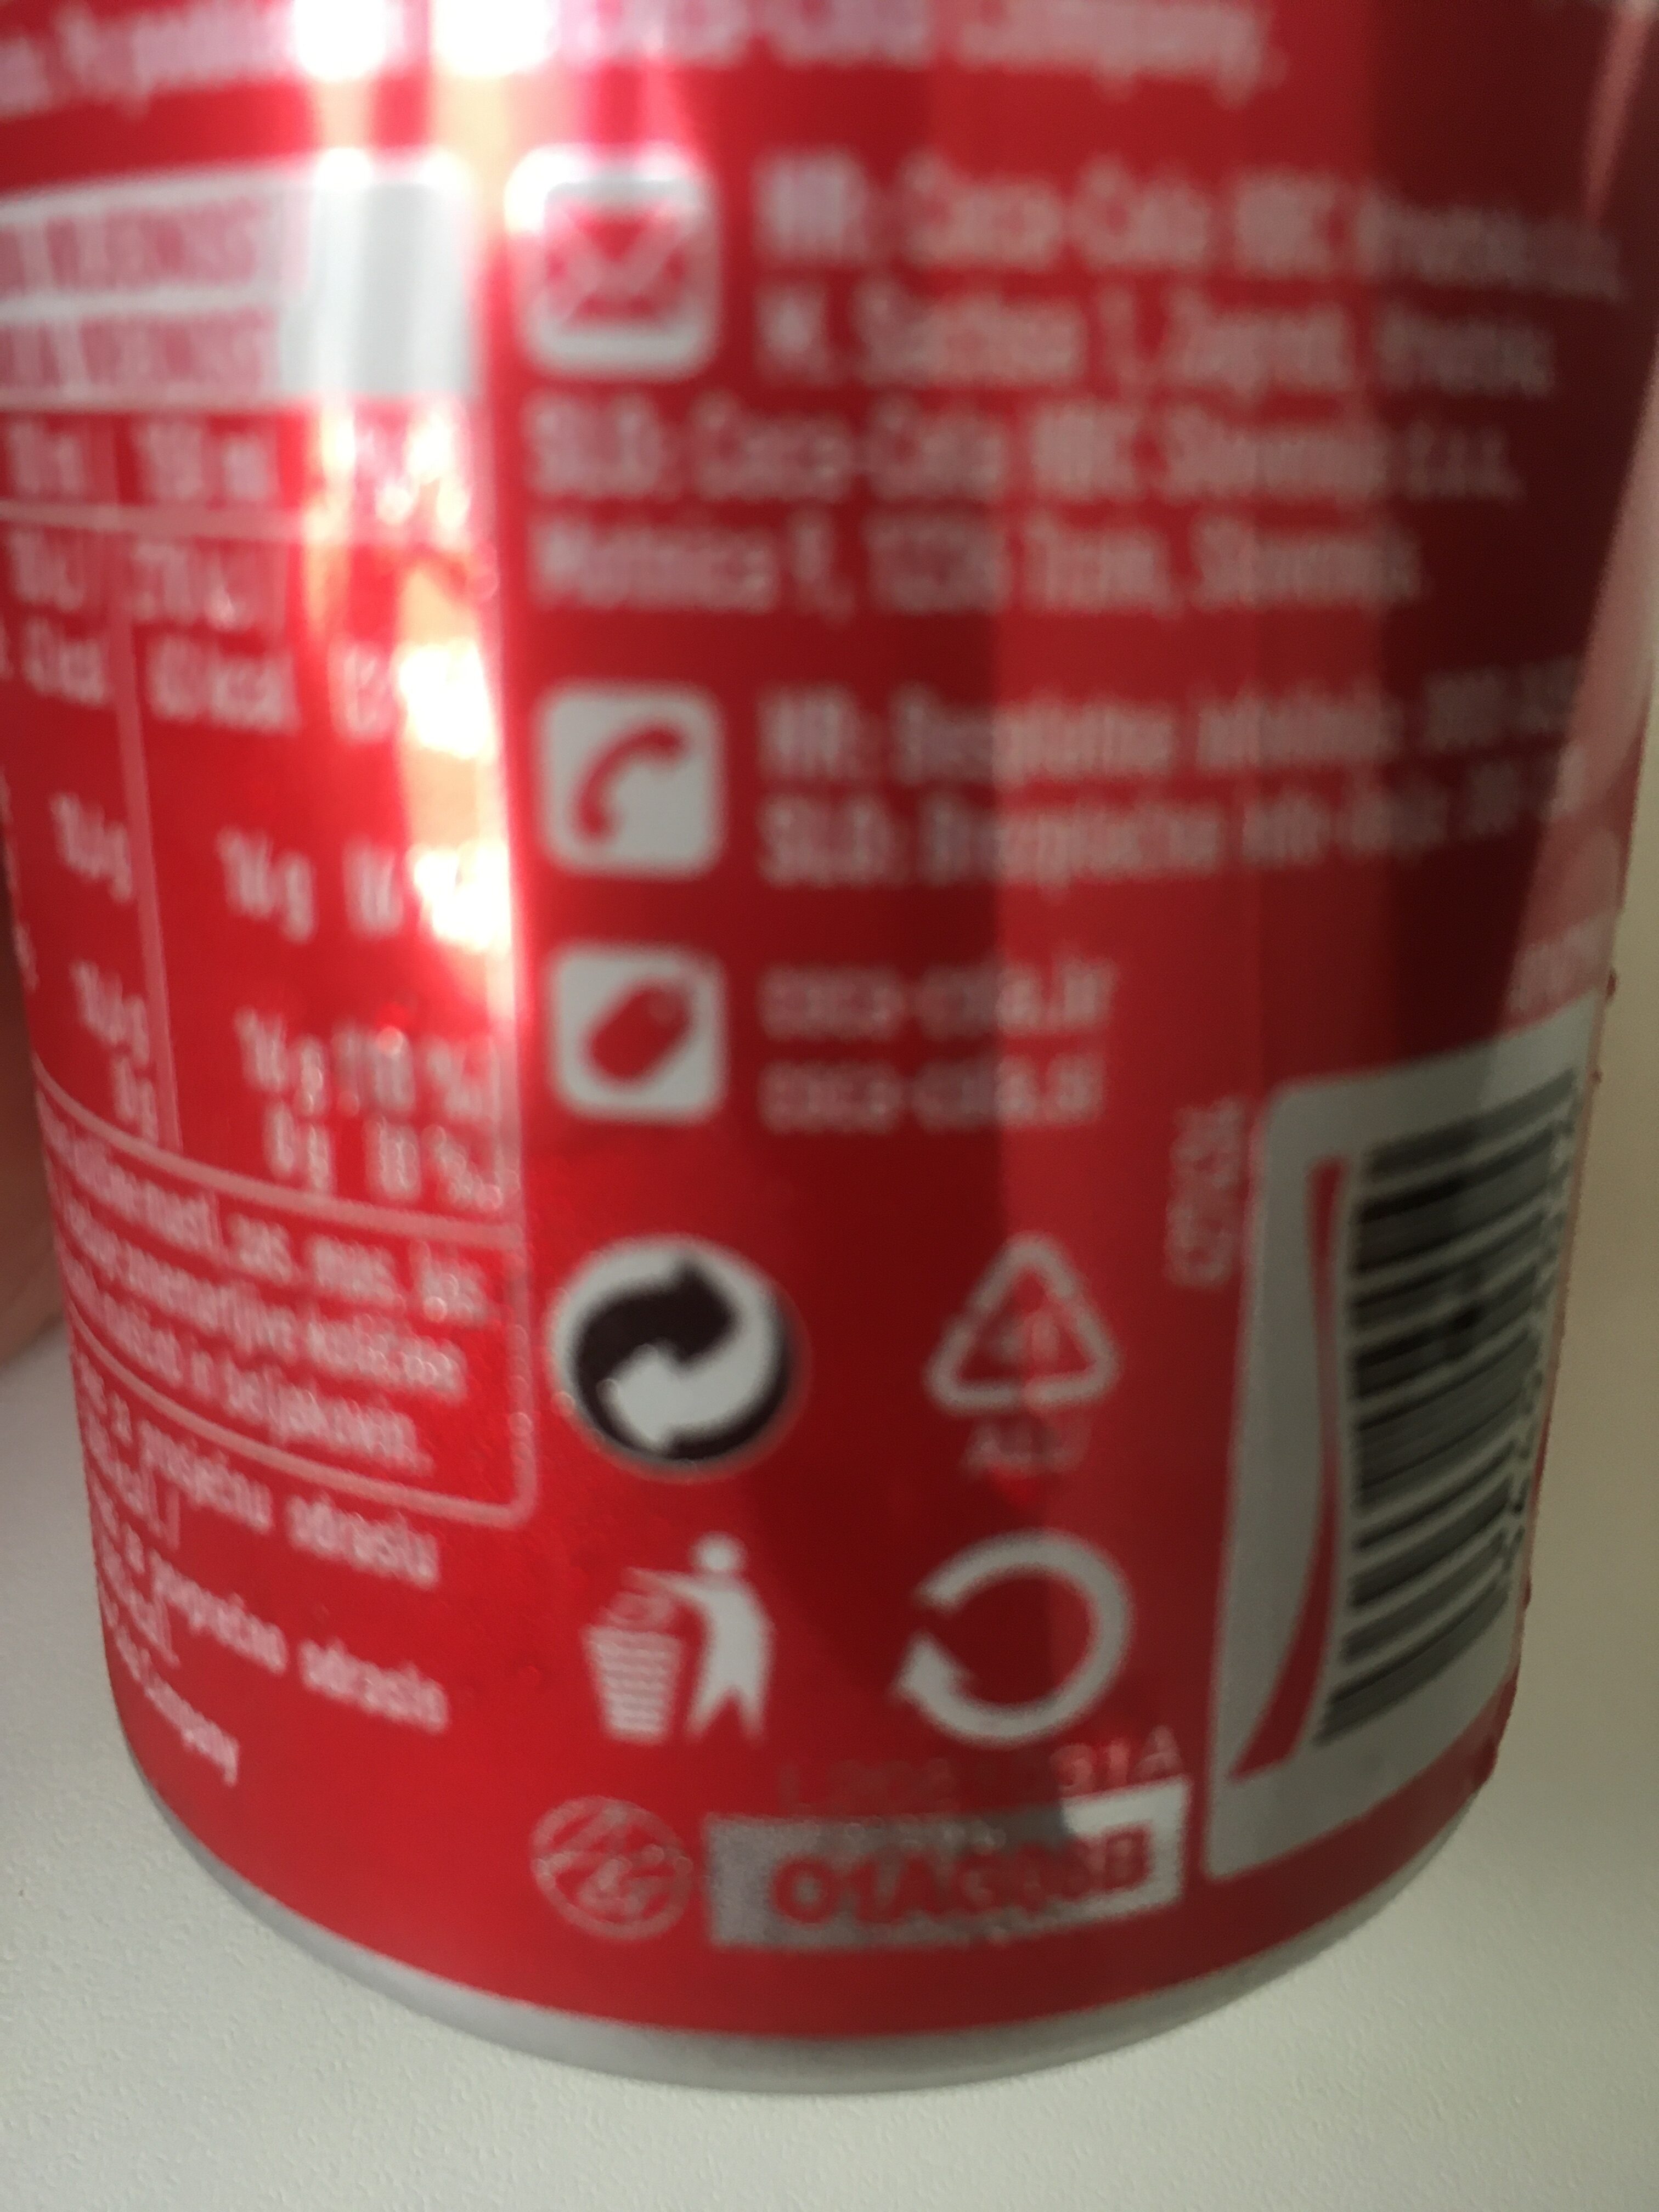 Coca cola - Recycling instructions and/or packaging information